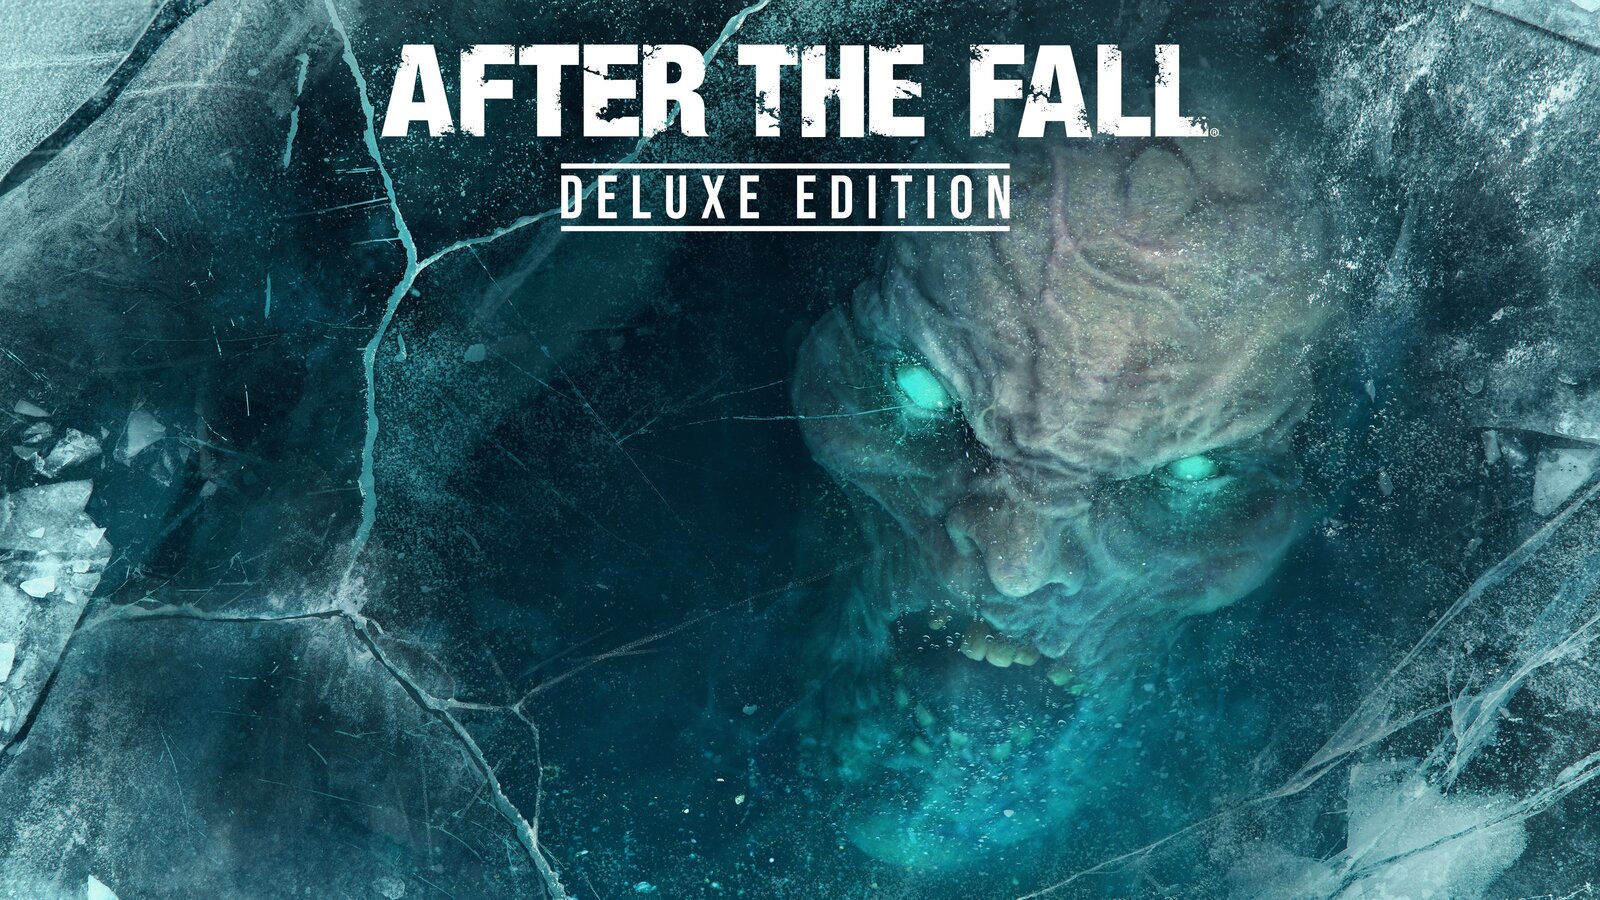 After the Fall - Deluxe Edition